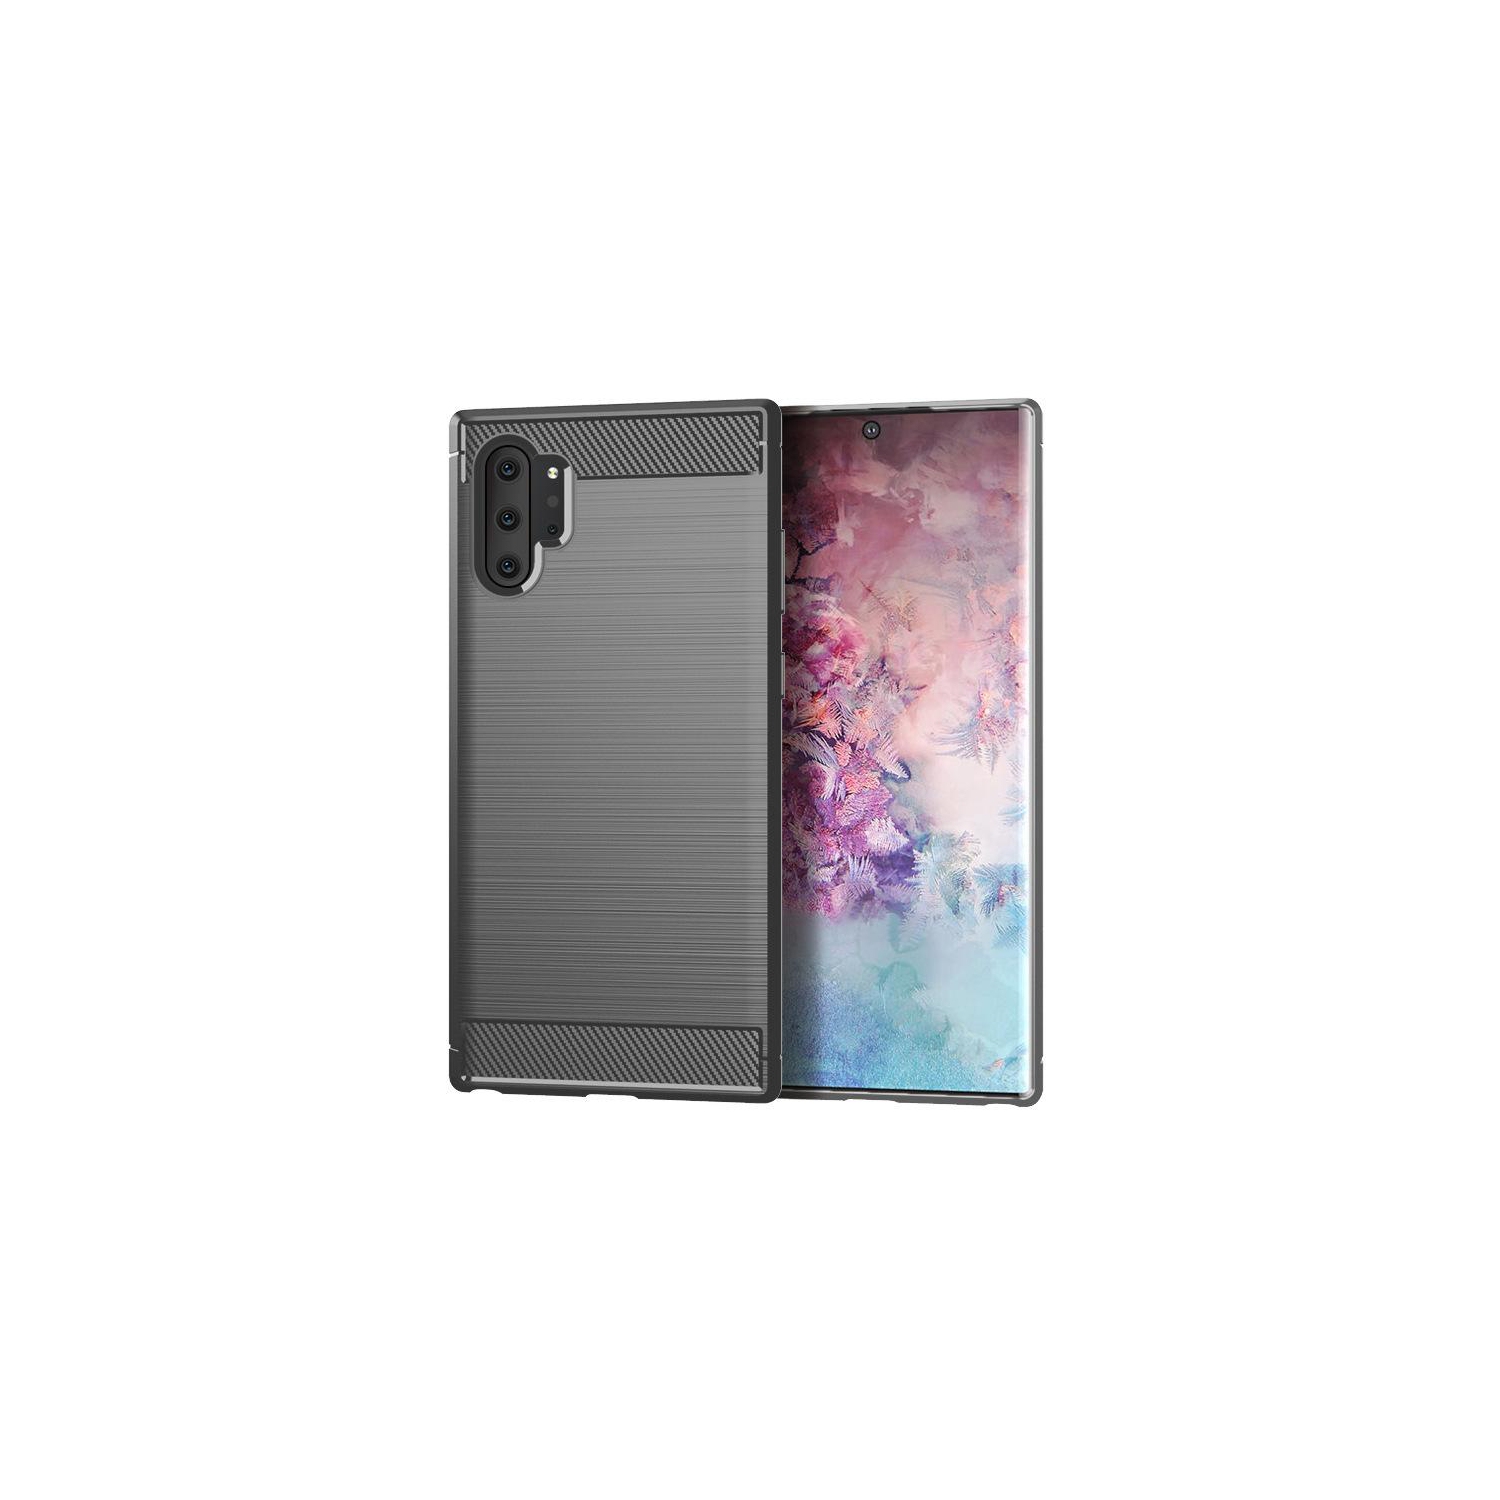 PANDACO Grey Brushed Metal Case for Samsung Galaxy Note 10+